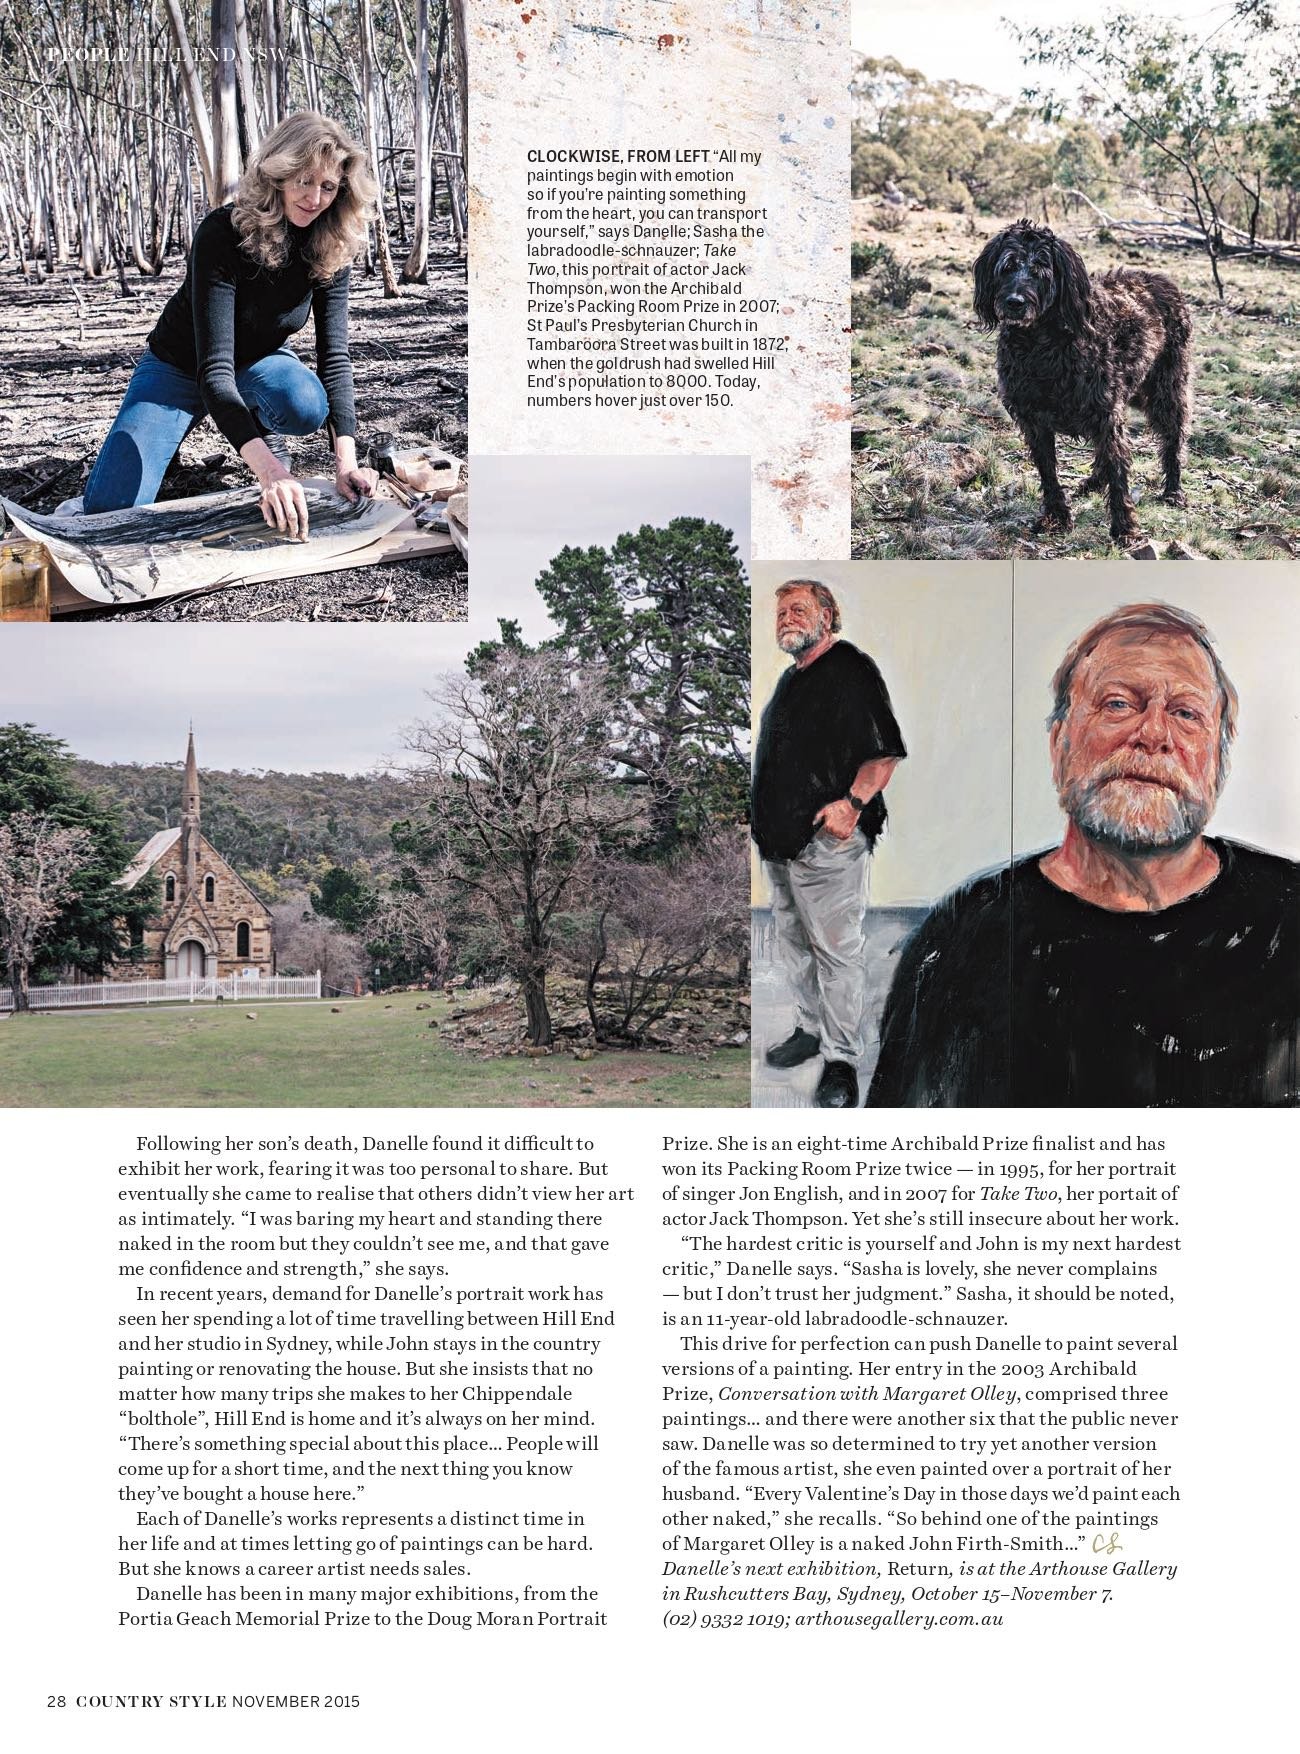 danelle_bergstrom_country_style_nov_2015_article_page-0003.jpeg